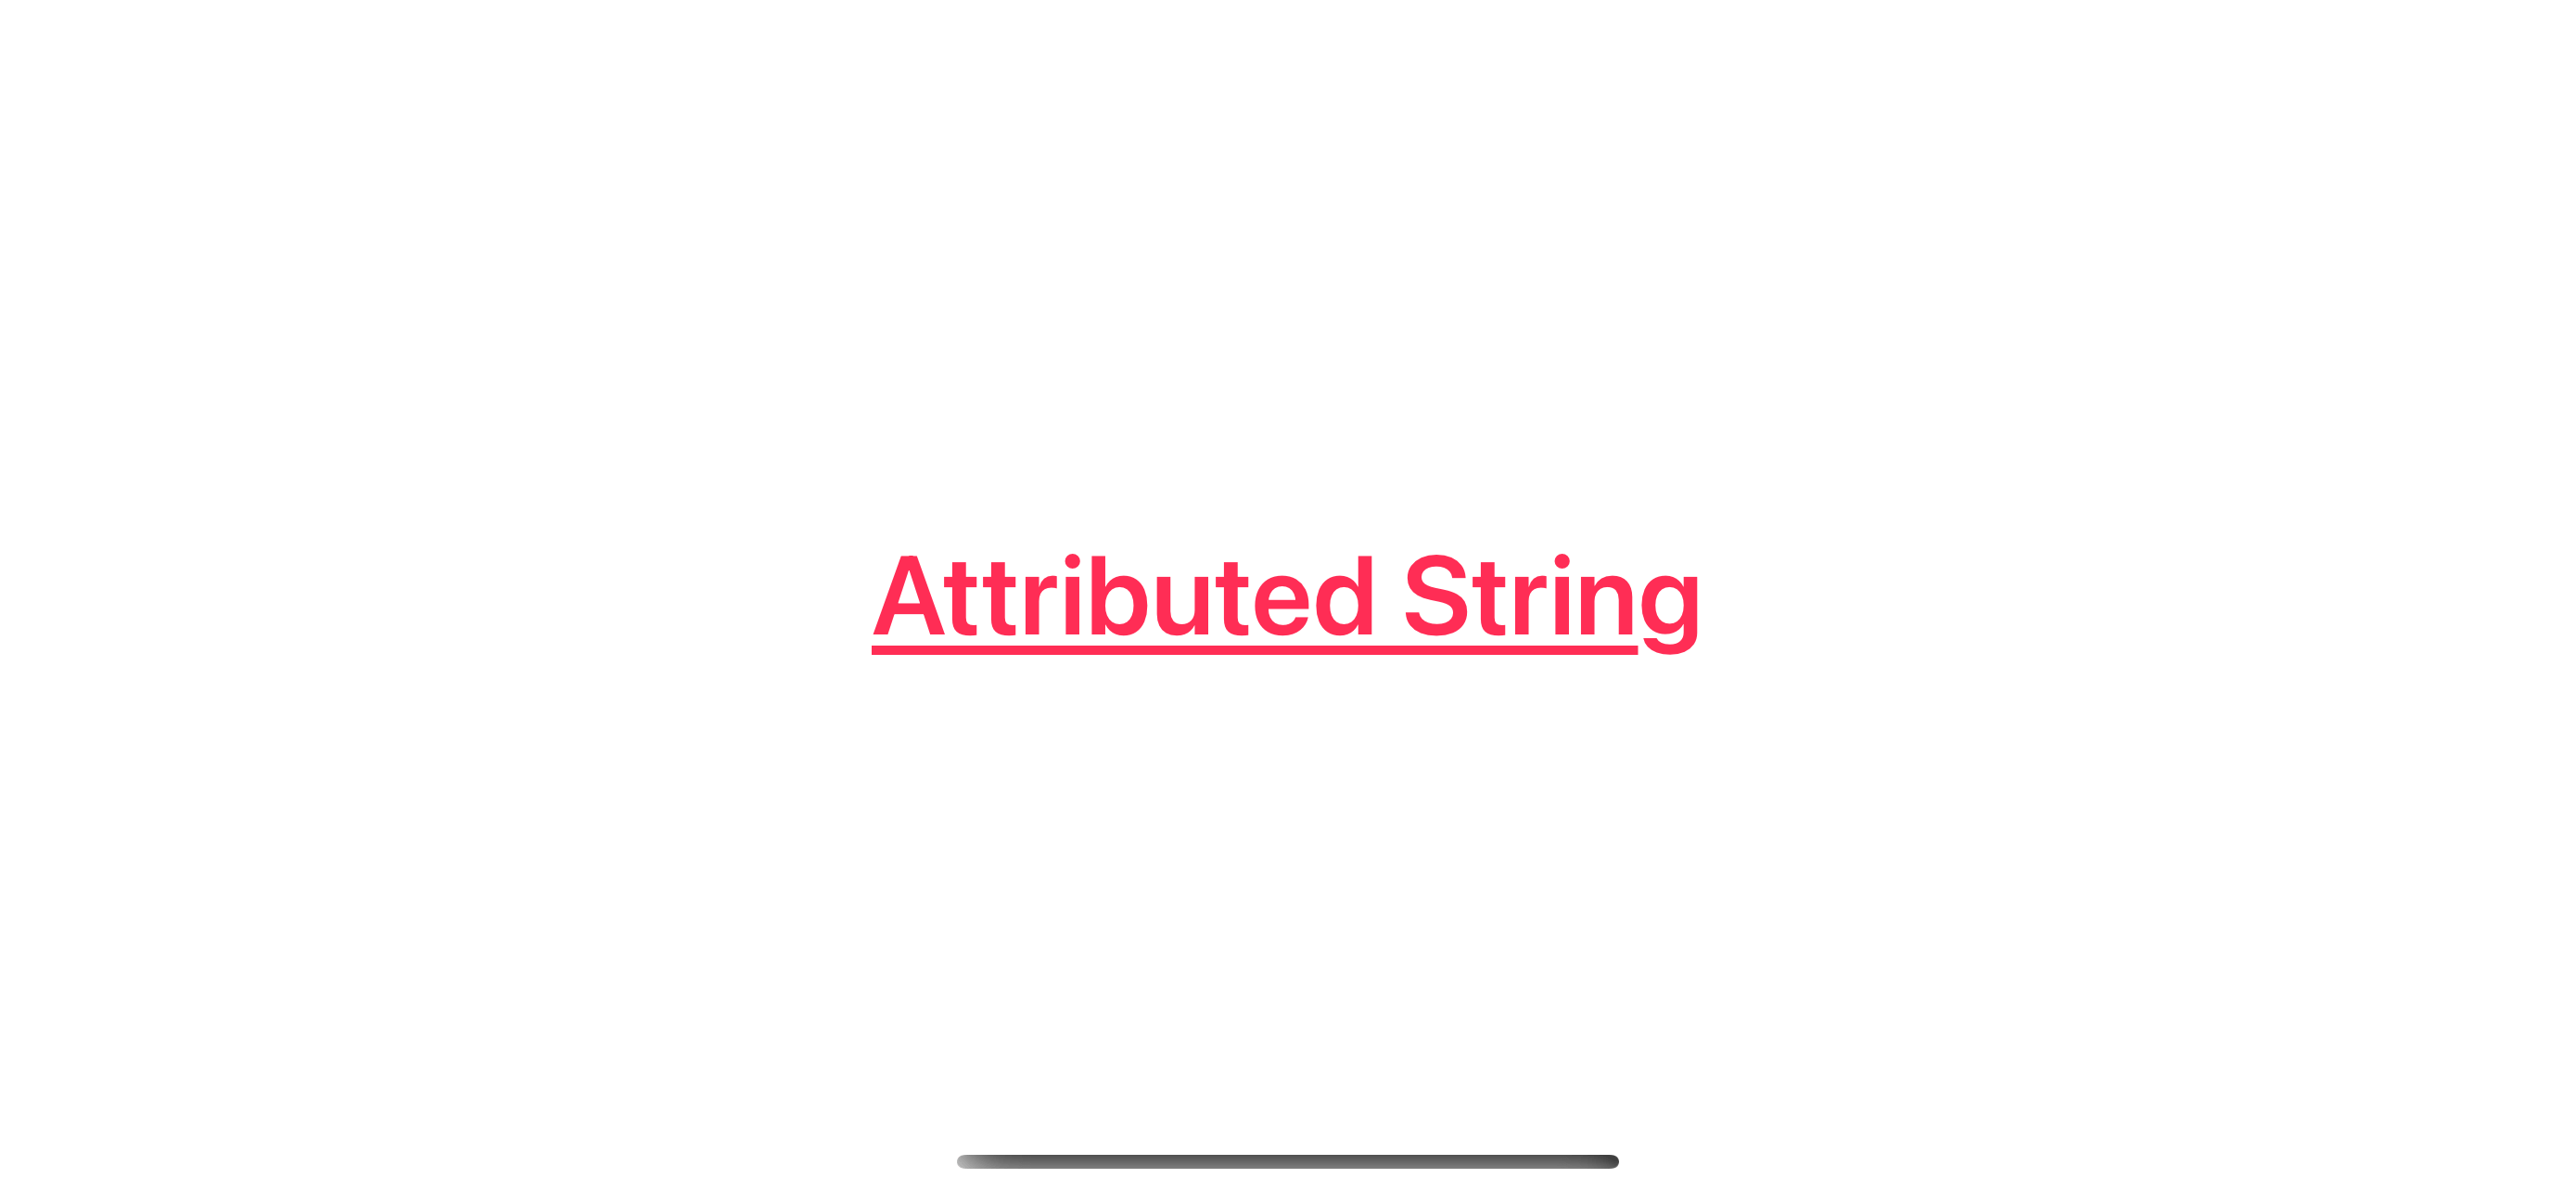 Use NSAttributedString in SwiftUI app.